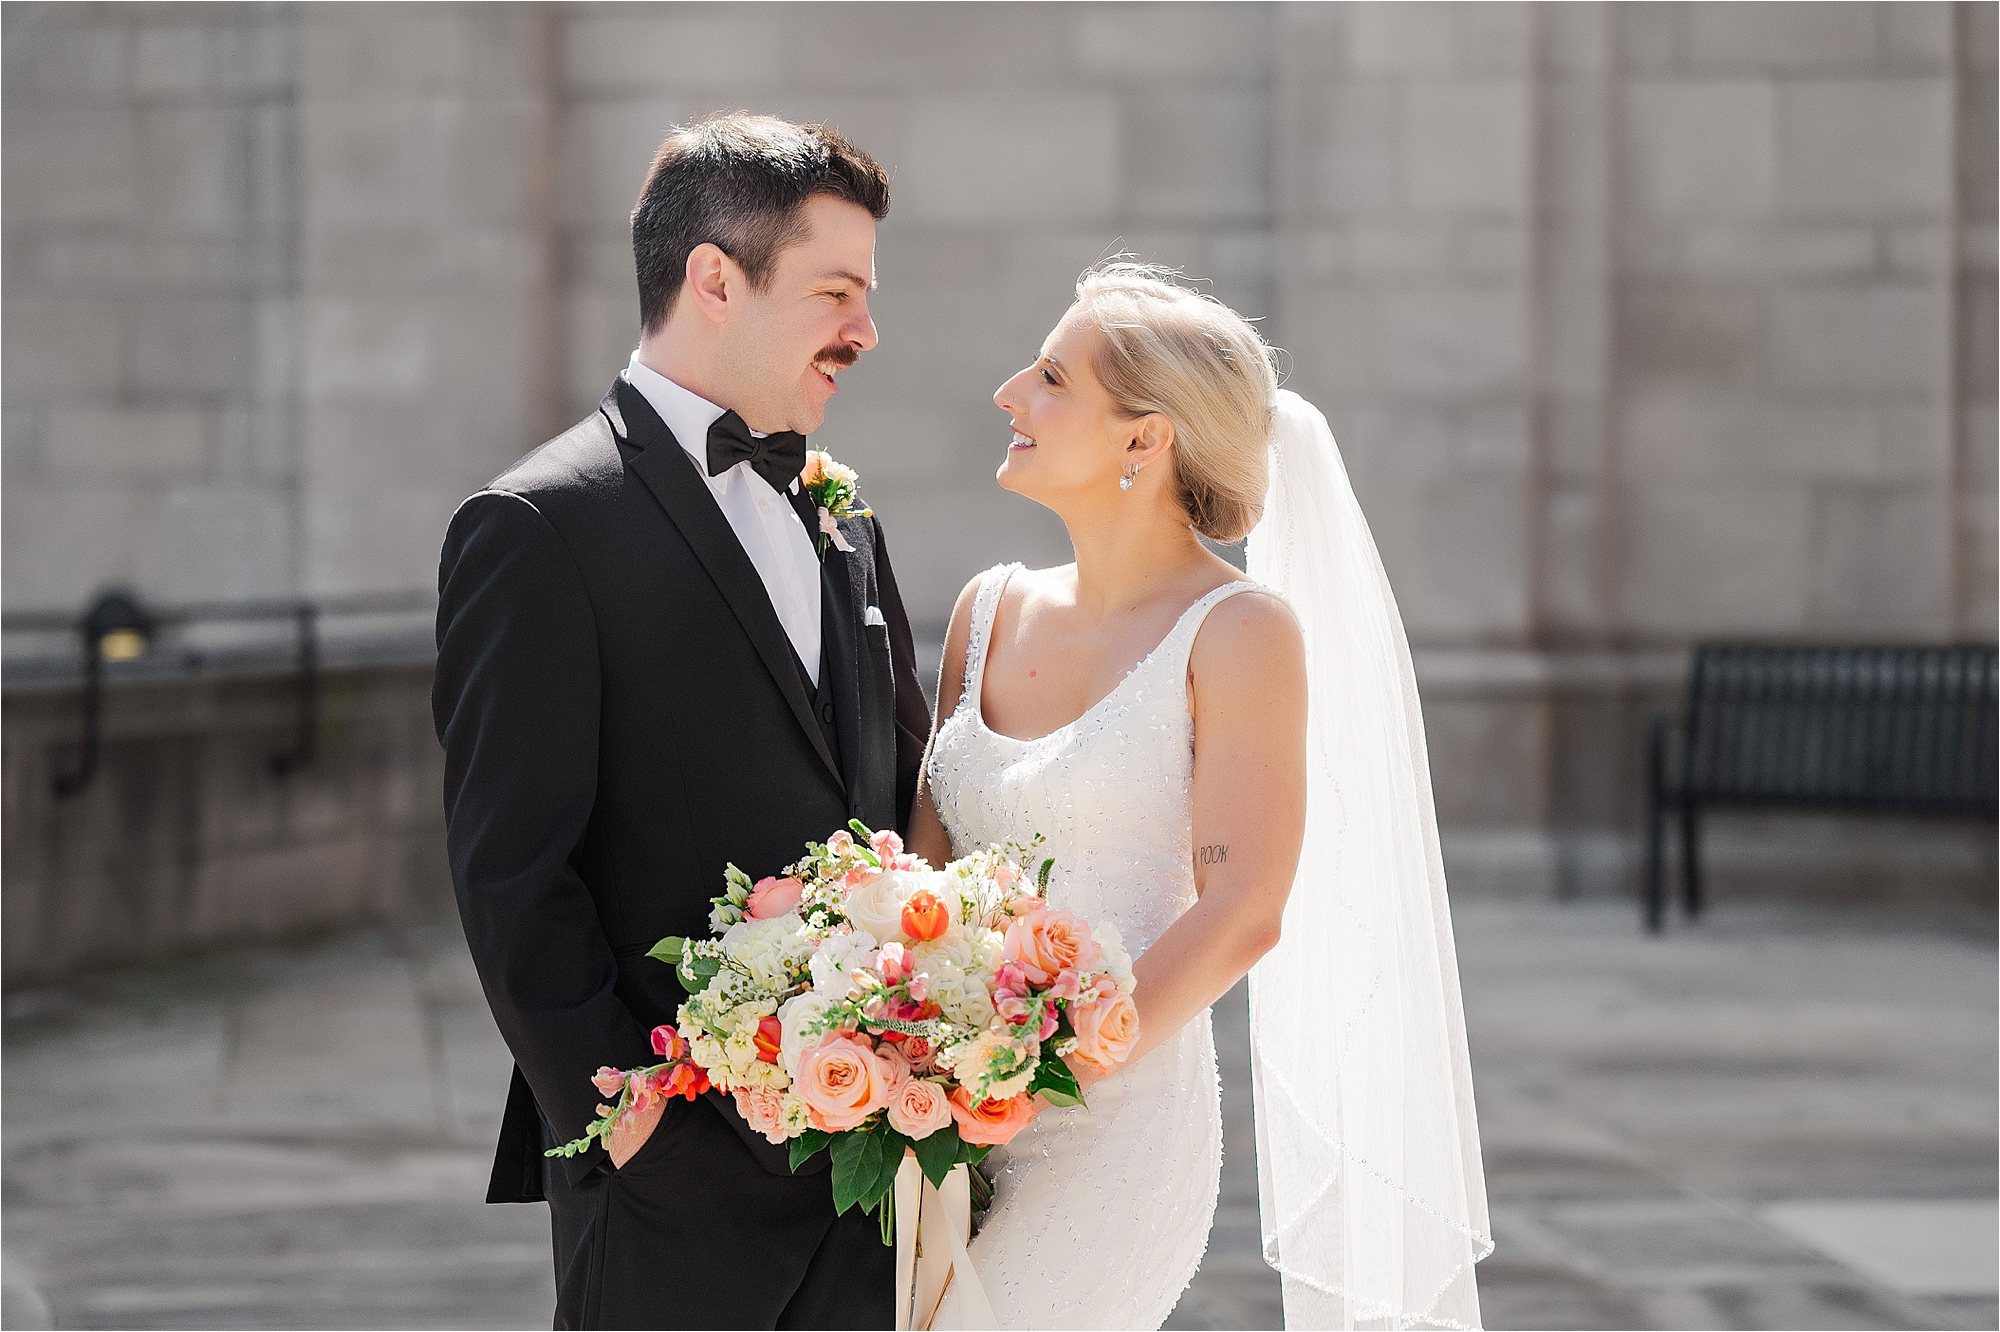 cathedral of learning pittsburgh wedding photos • Soldiers and Sailors Memorial Hall Wedding Photos